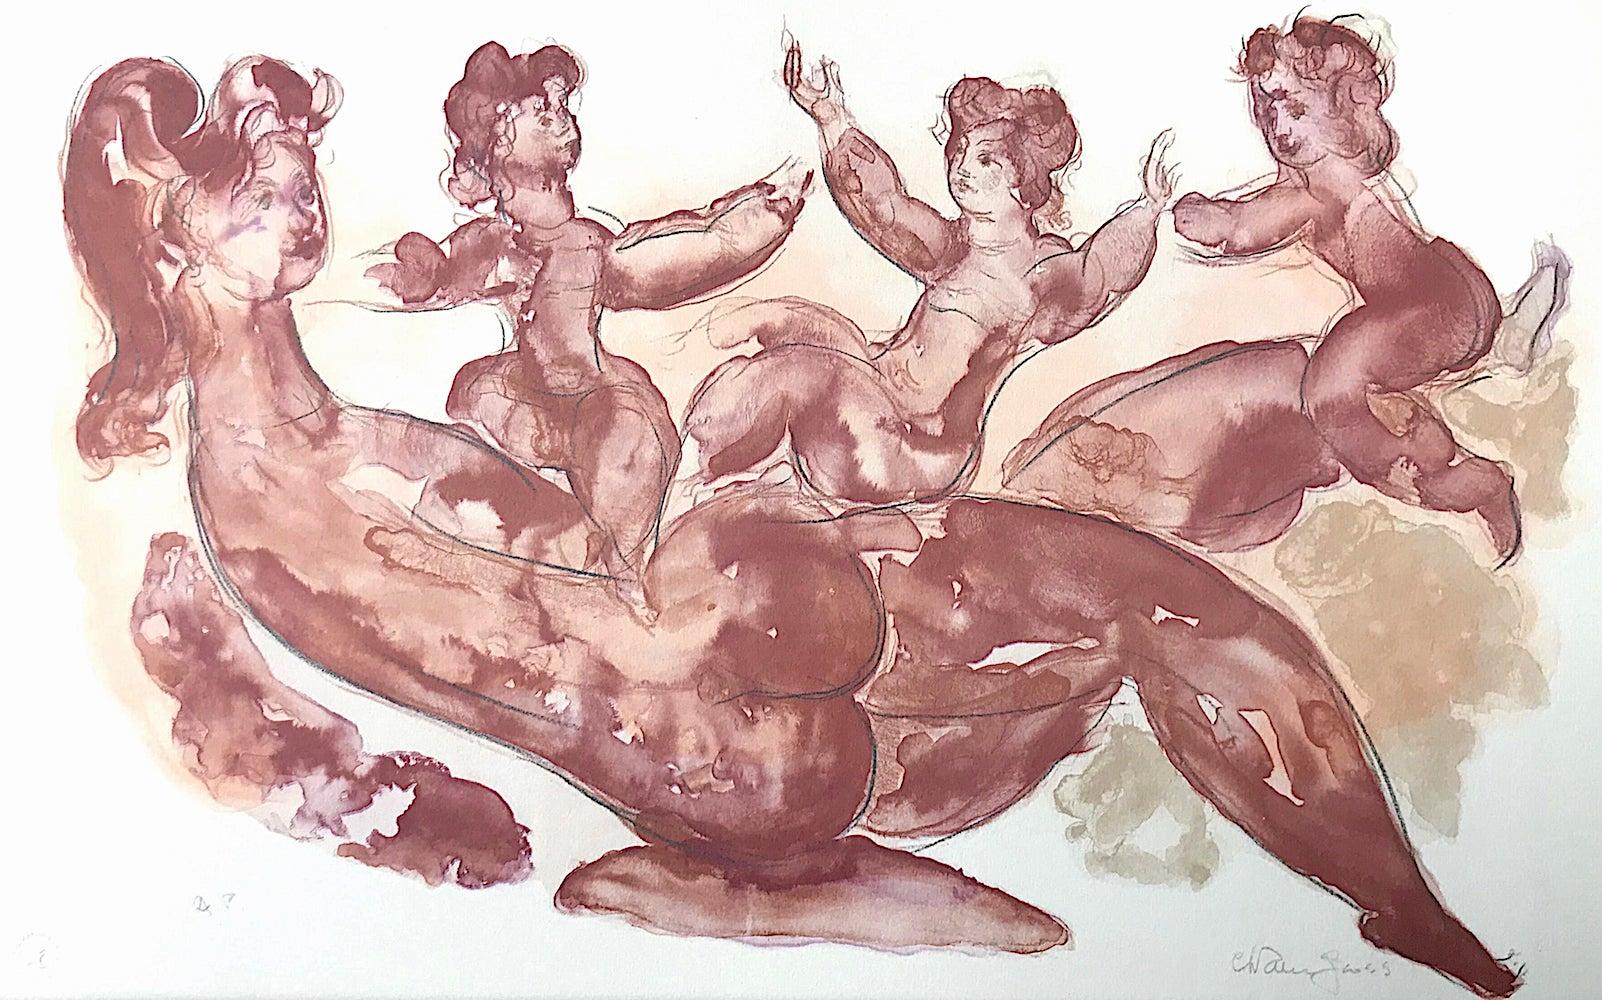 Chaim Gross Nude Print - MOTHER AND CHILDREN PLAYING, Signed Lithograph, Watercolor Figure Study